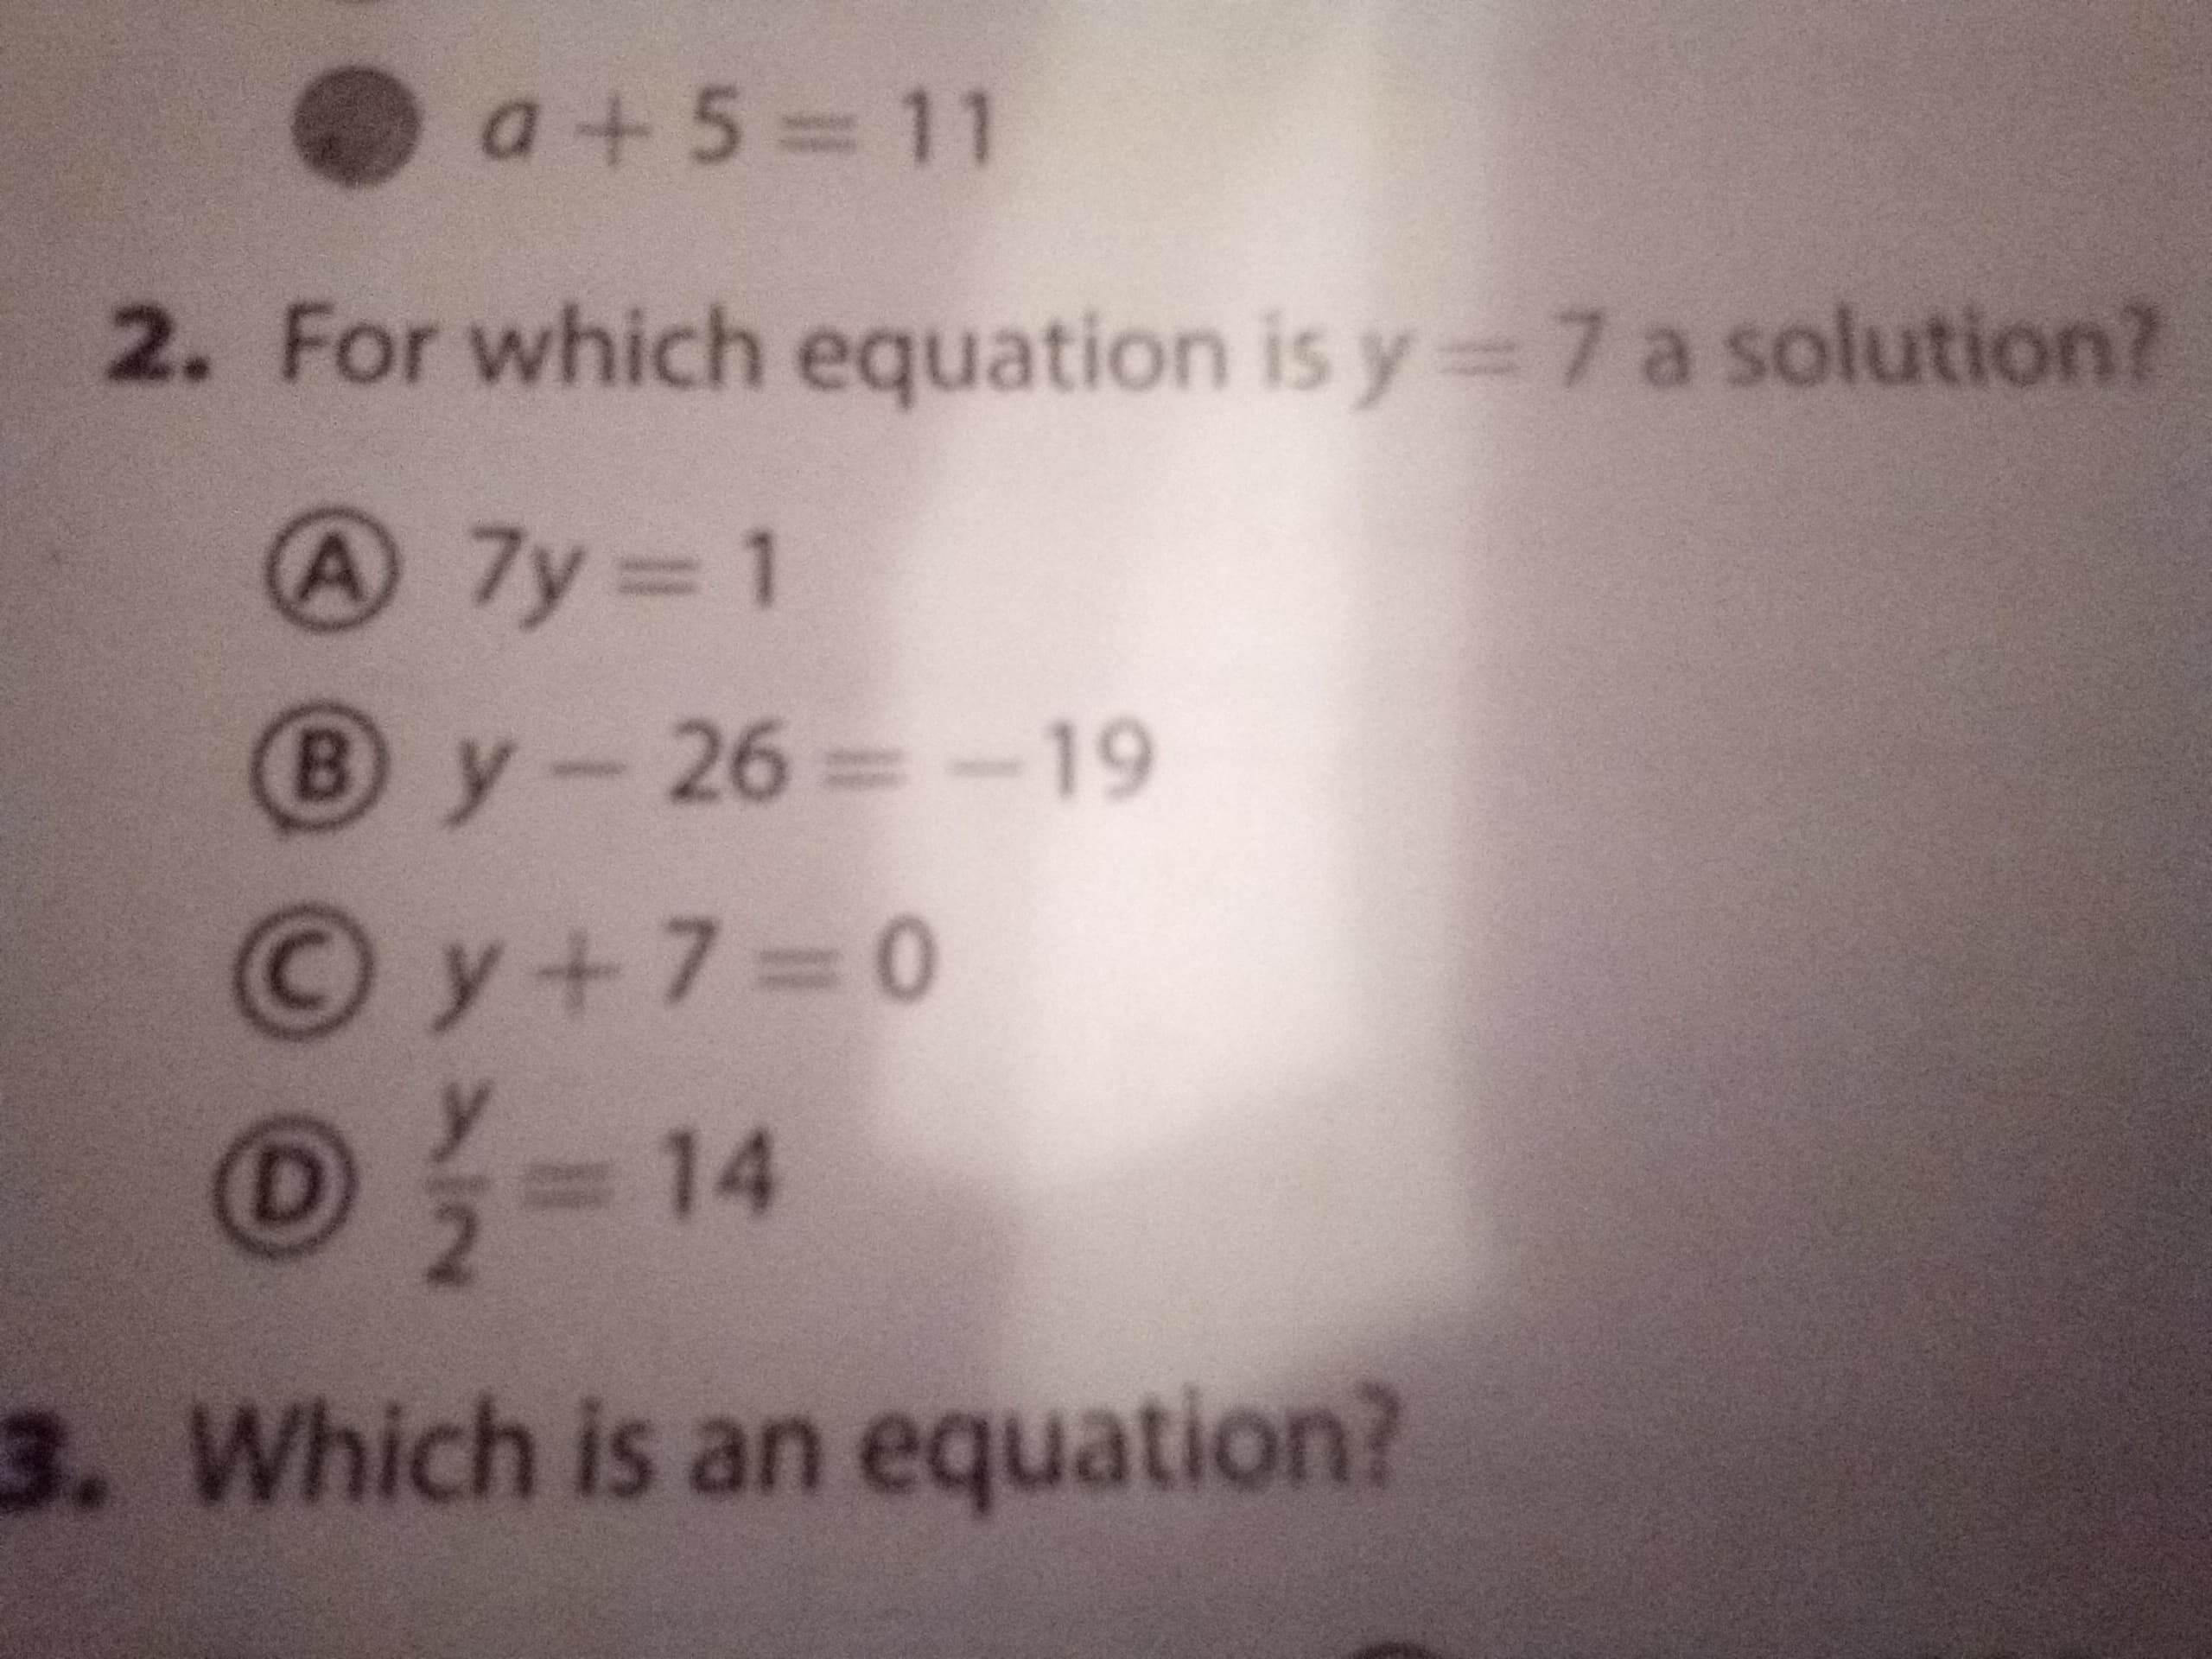 a+5=11
2. For which equation is y=7 a solution?
A 7y 1
By-26=-19
Oy+7=0
O- 14
3. Which is an equation?
